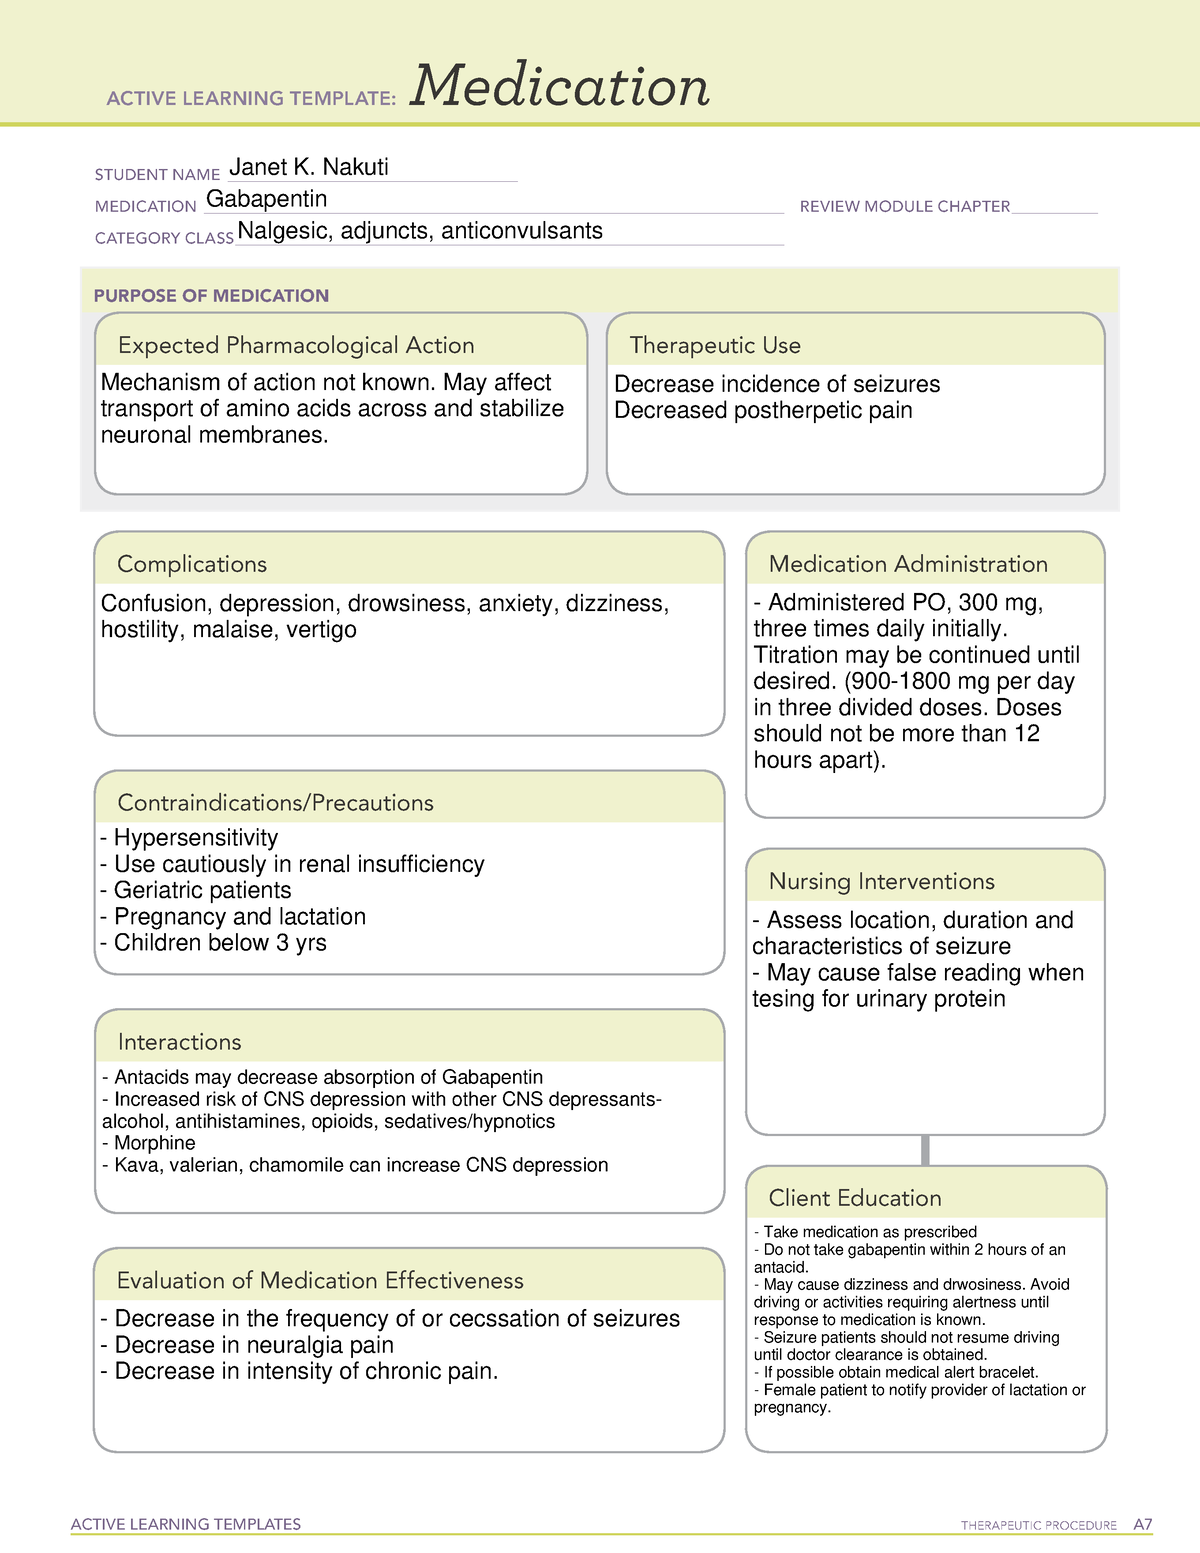 Medication card Gabapentin ACTIVE LEARNING TEMPLATES THERAPEUTIC